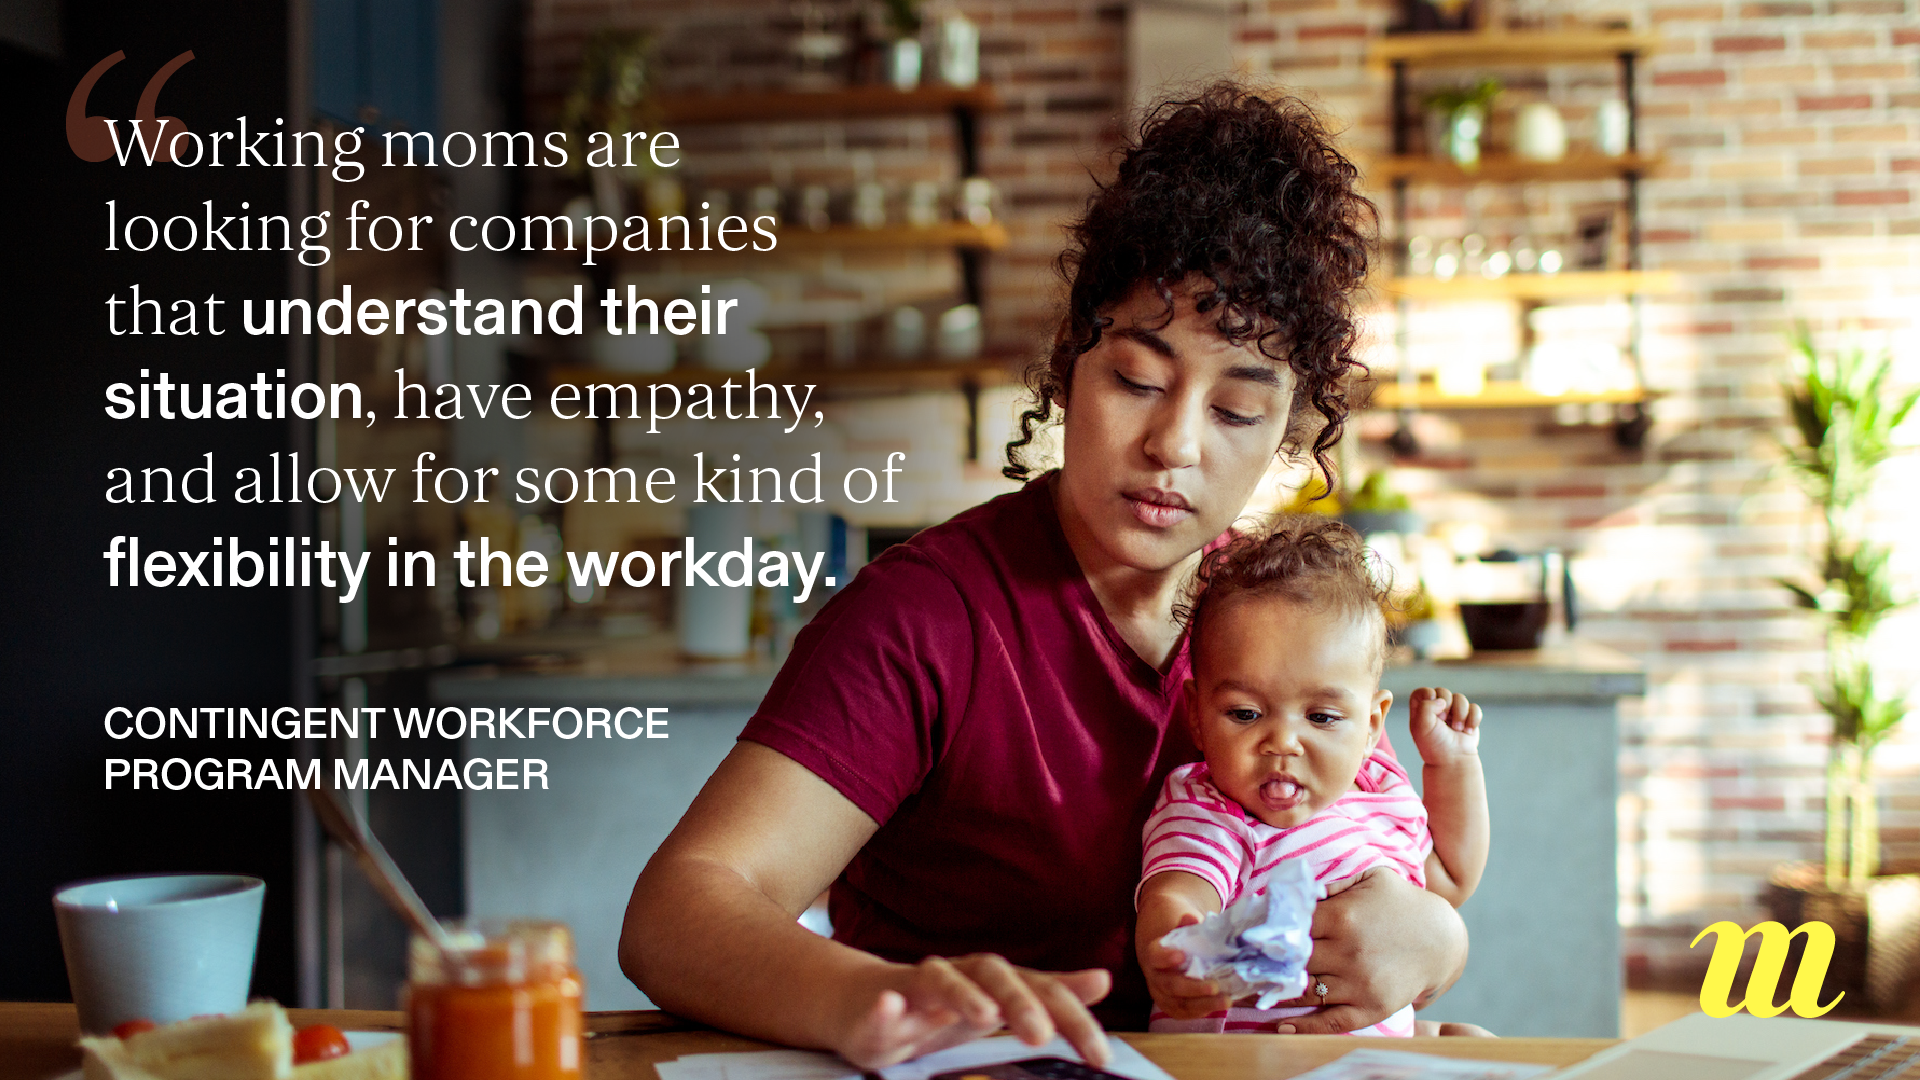 "Working moms are looking for companies that understand their situation, have empathy, and allow for some kind of flexibility in the workday." - Contingent Workforce Program Manager